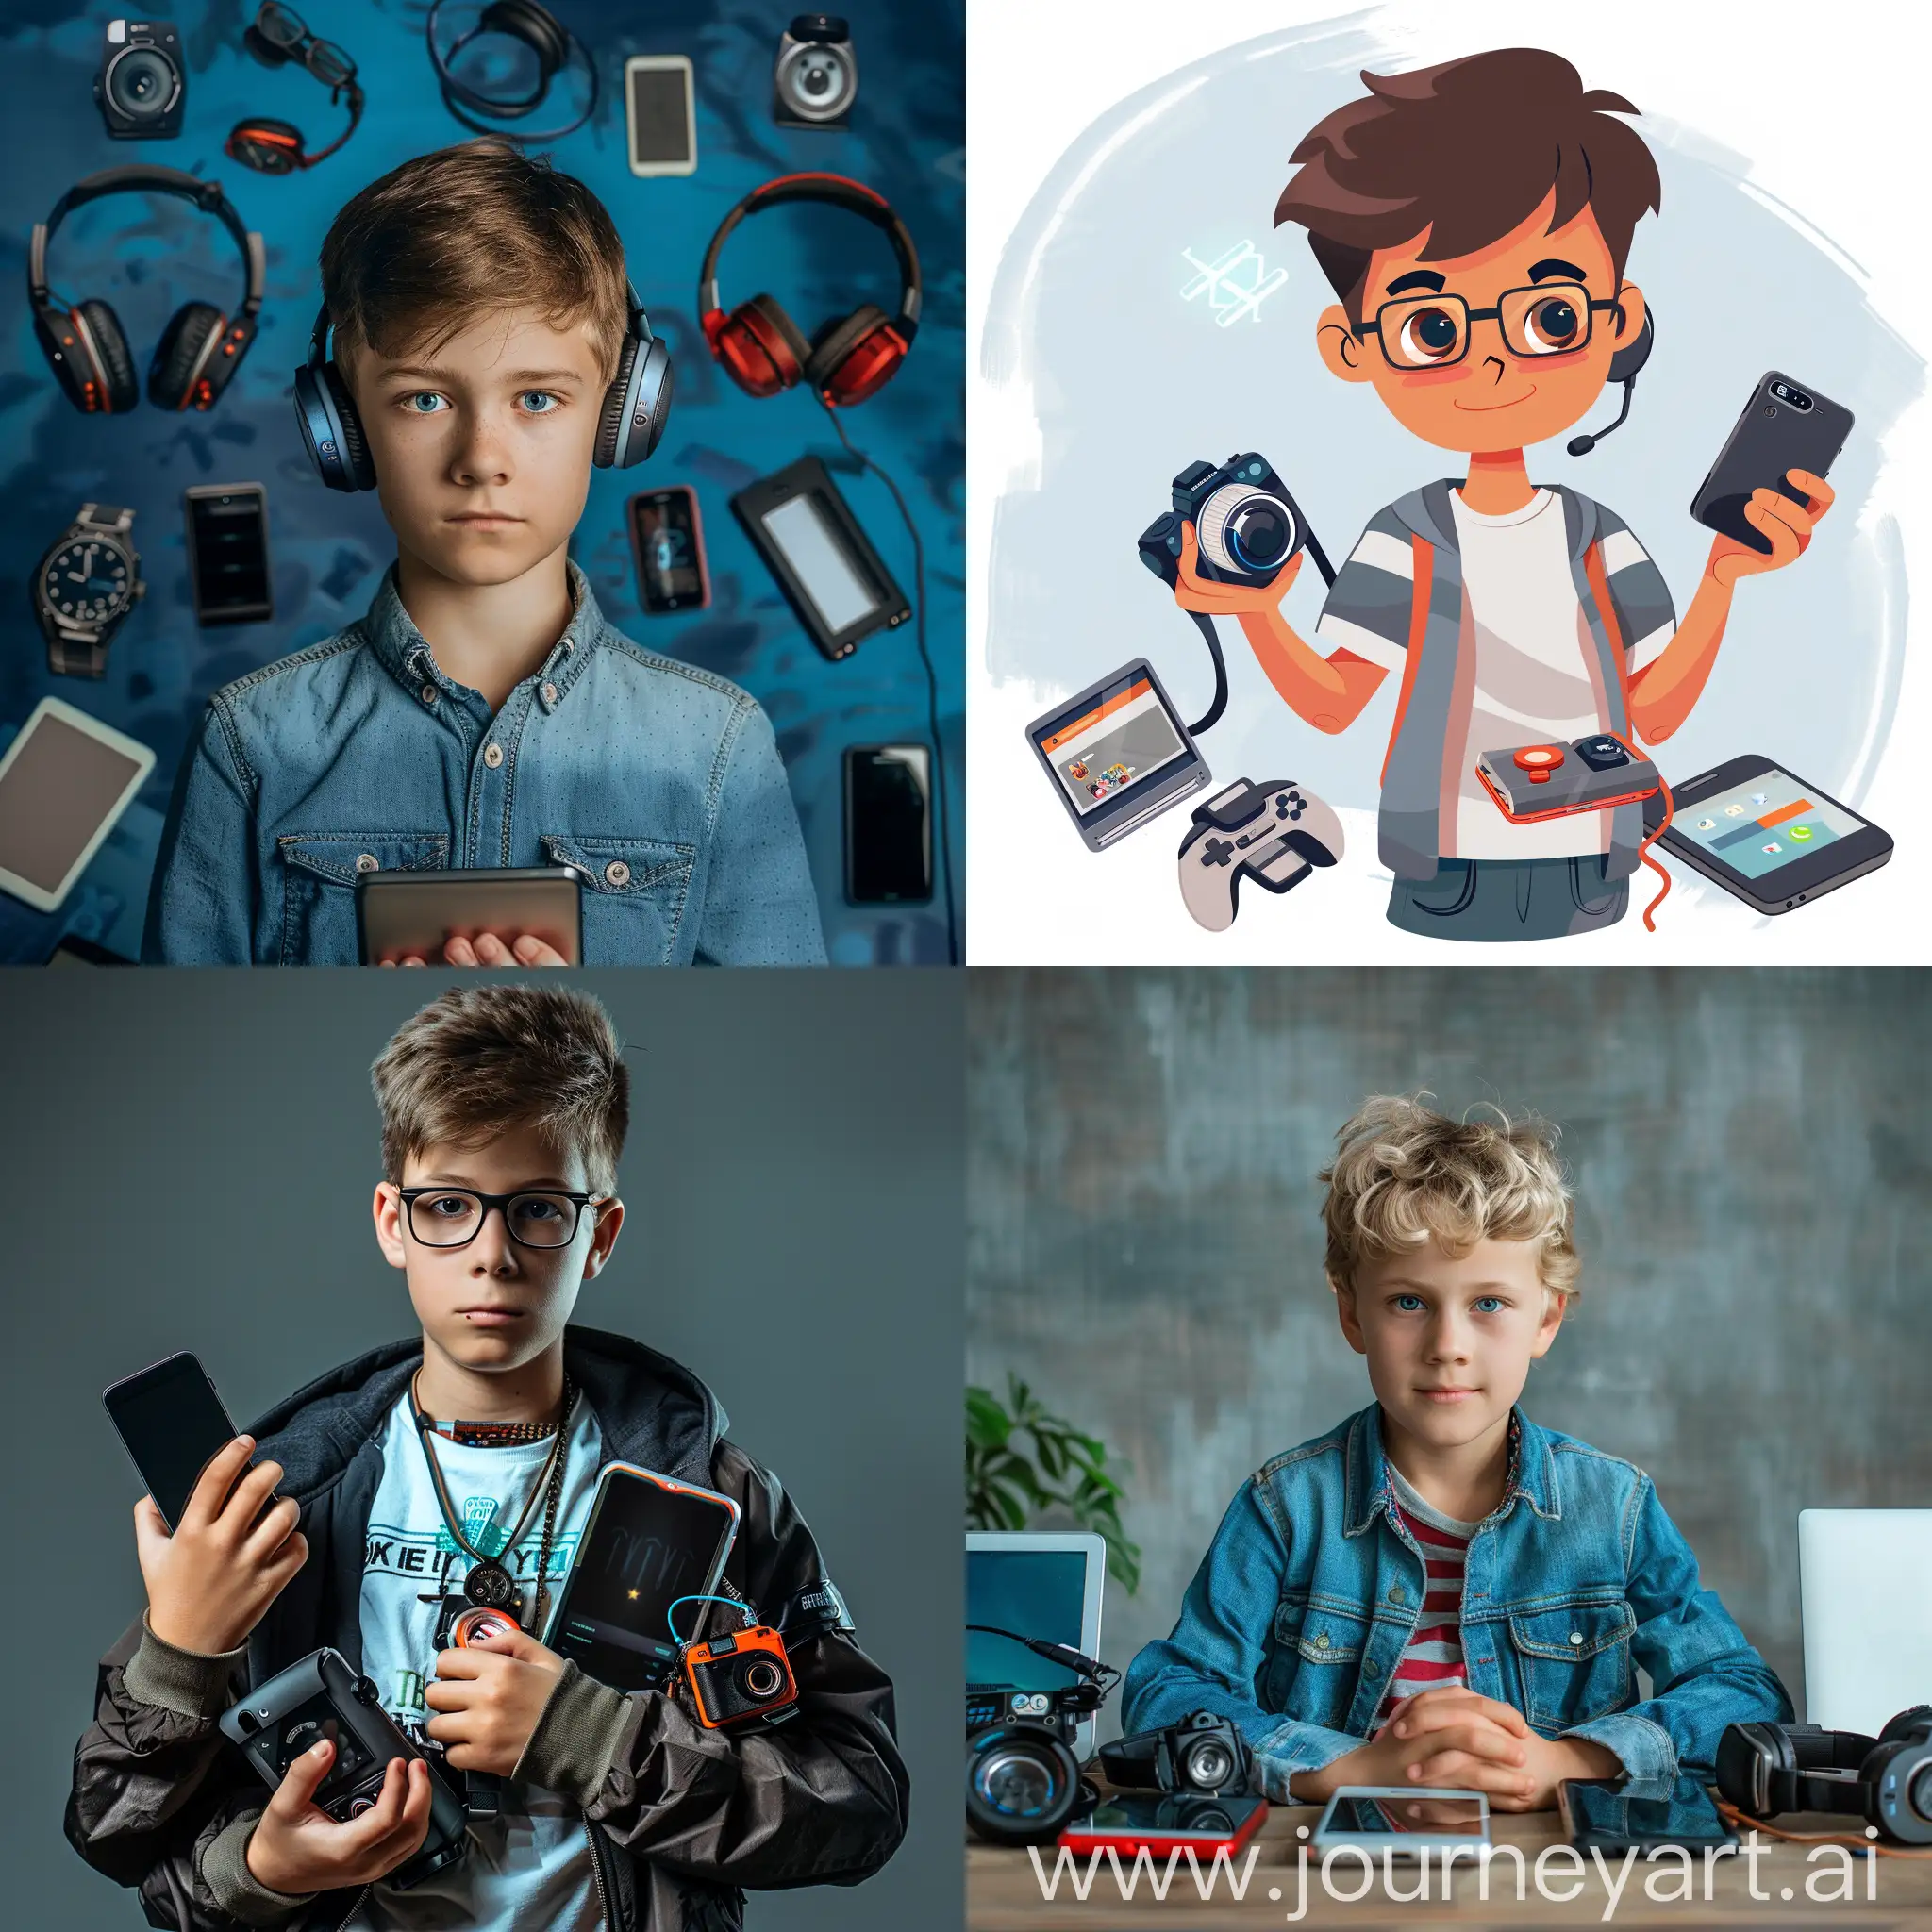 A smart boy for channel profile picture with a few gadgets